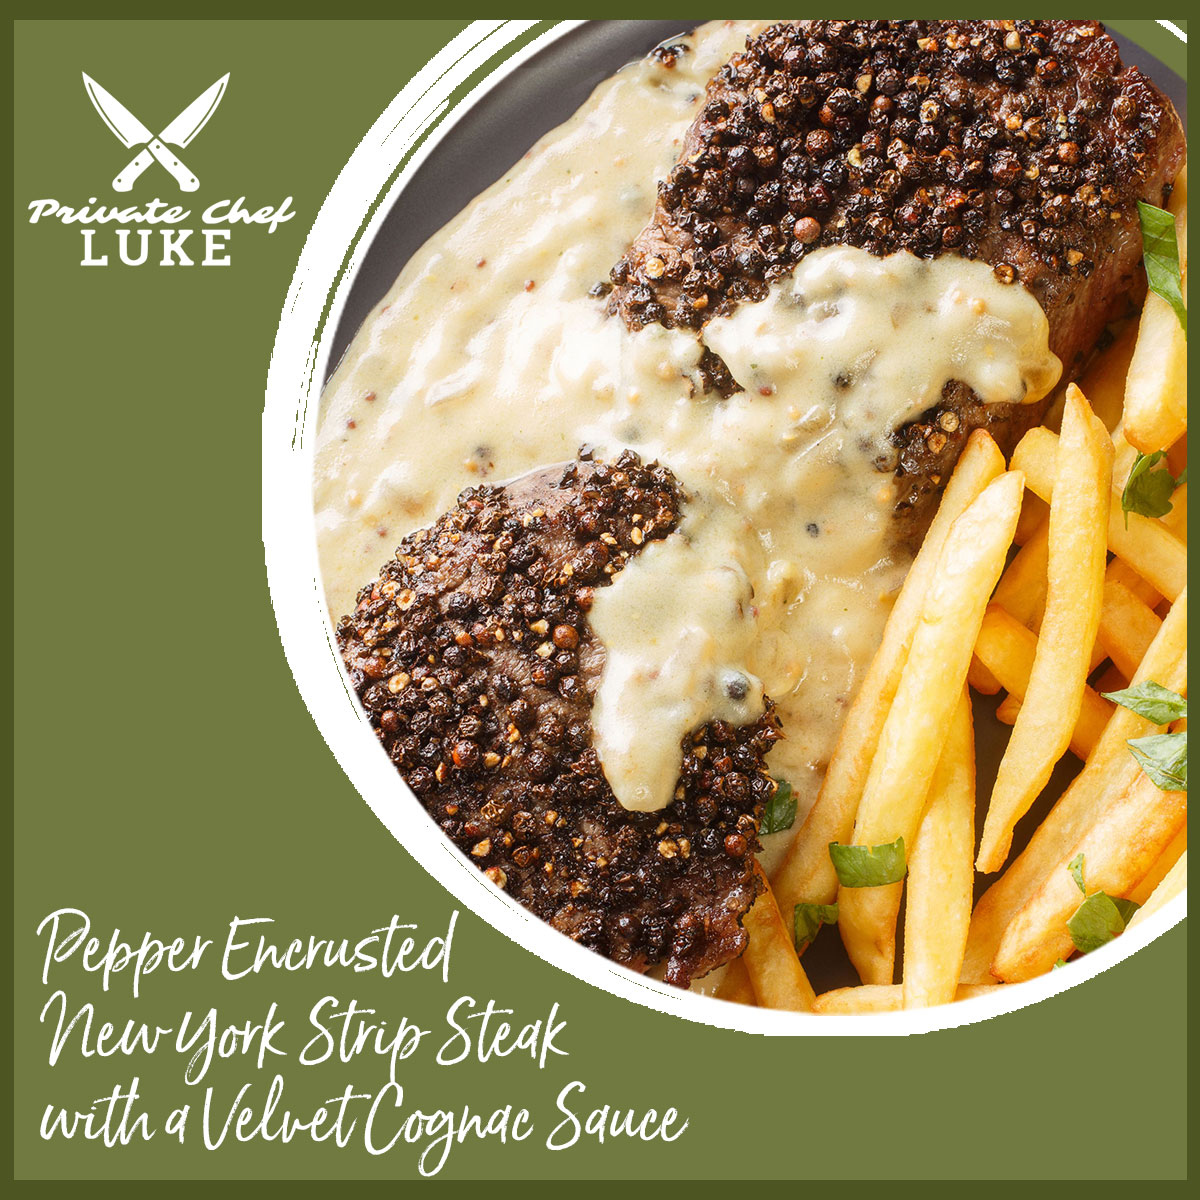 Click to view and download the recipe and tips for Pepper Encrusted New York Steak from Chef Luke and Trig's.